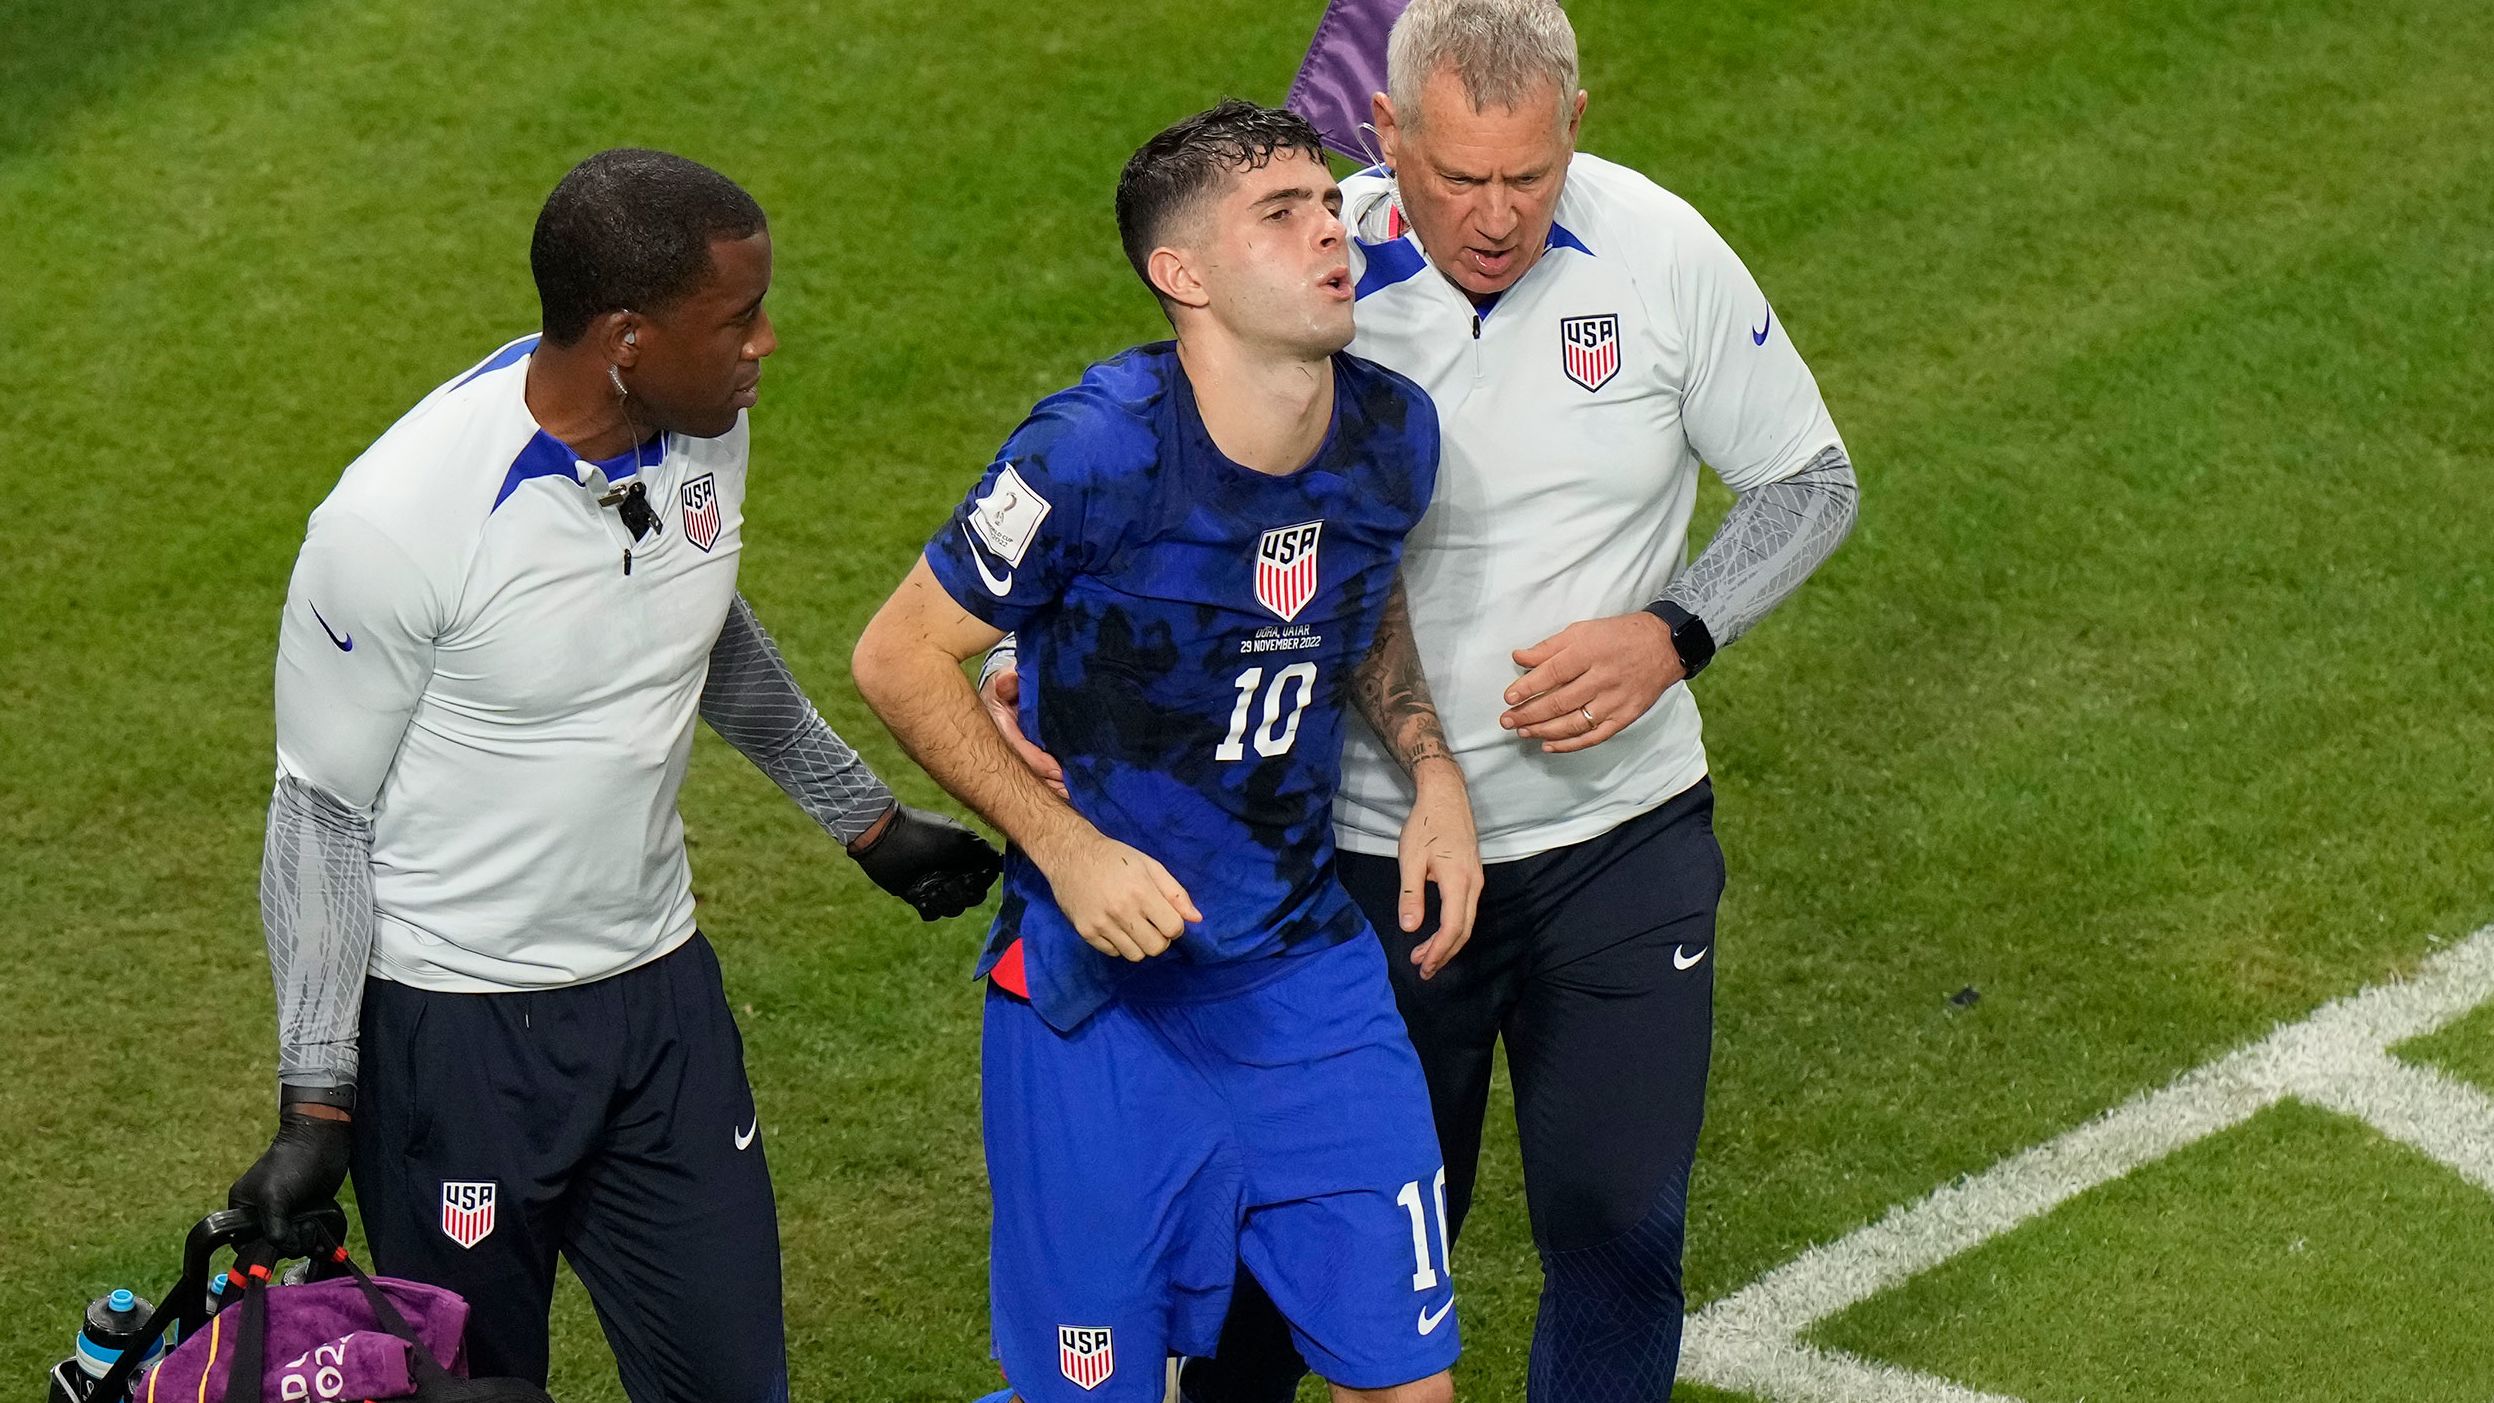 Pulisic was helped by team doctors after he scored, but later returned to the pitch. 